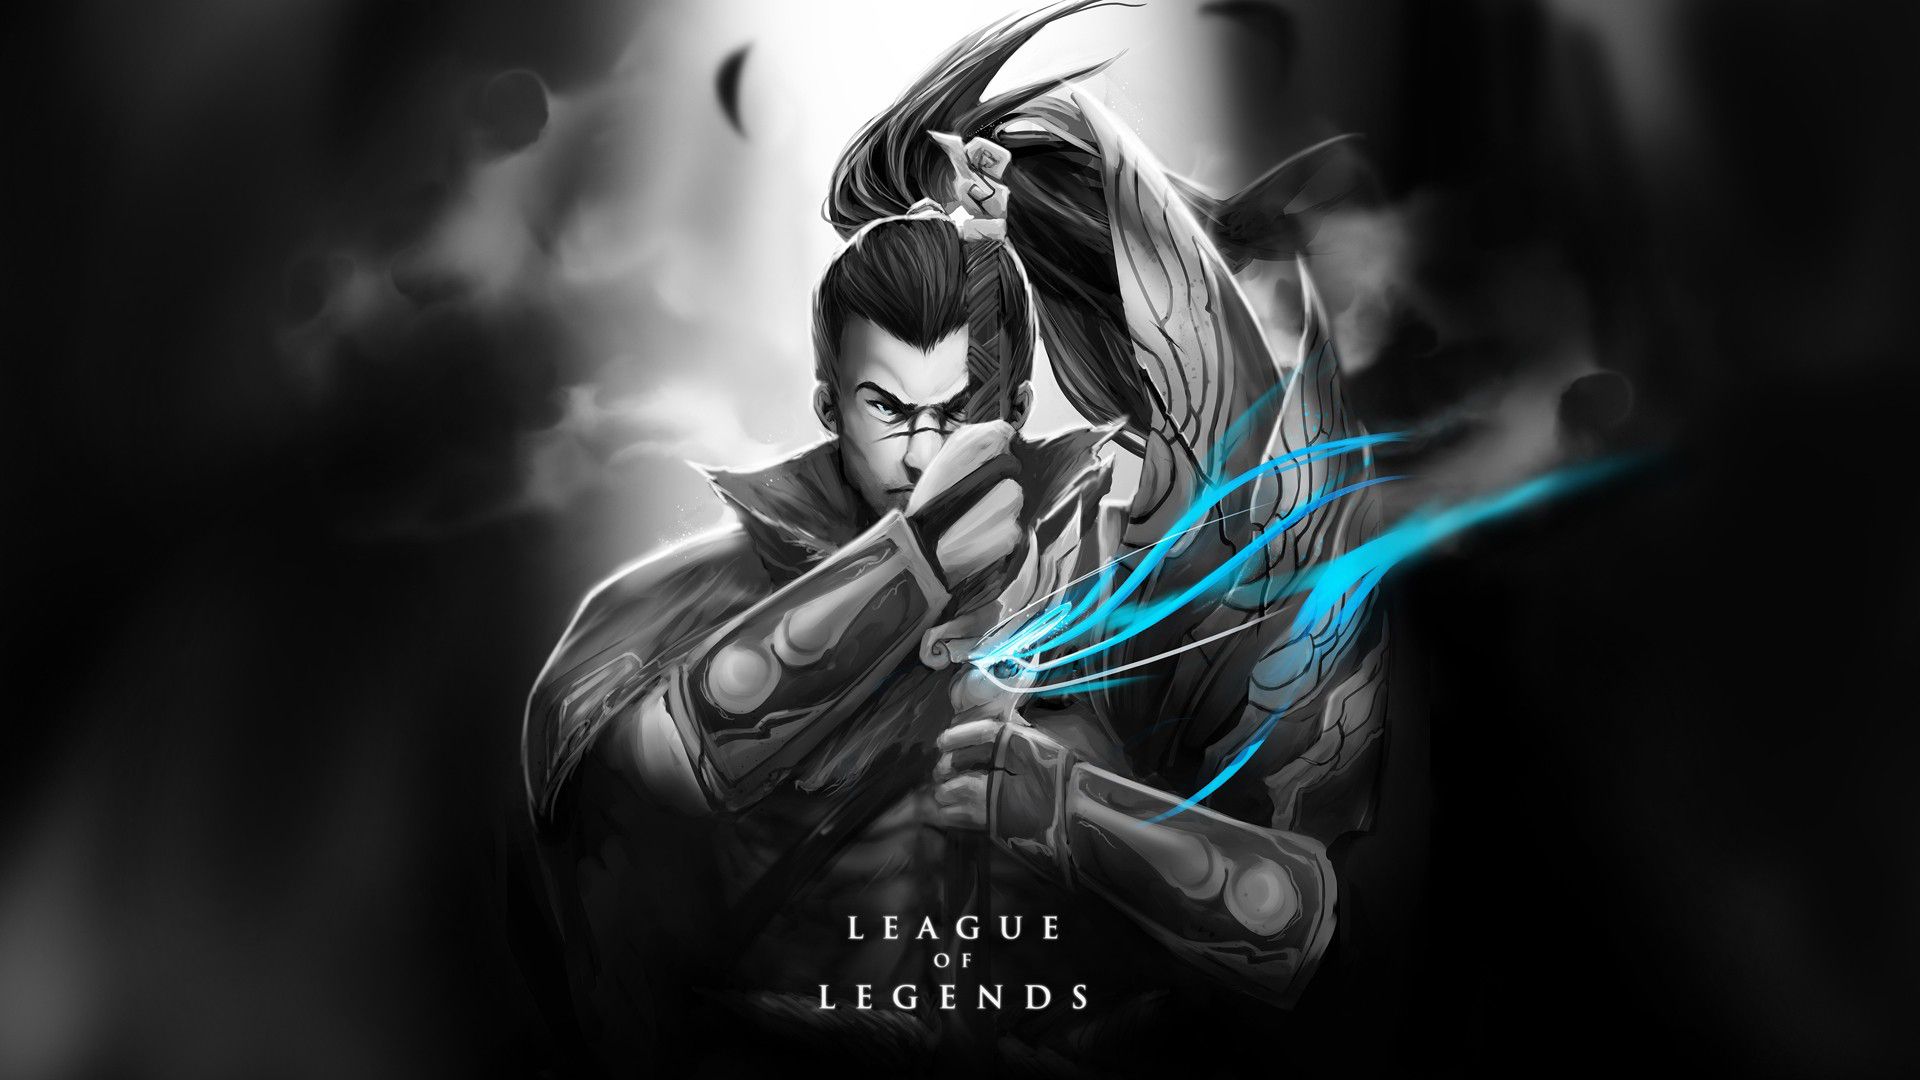 Download League Of Legends wallpapers for mobile phone, free